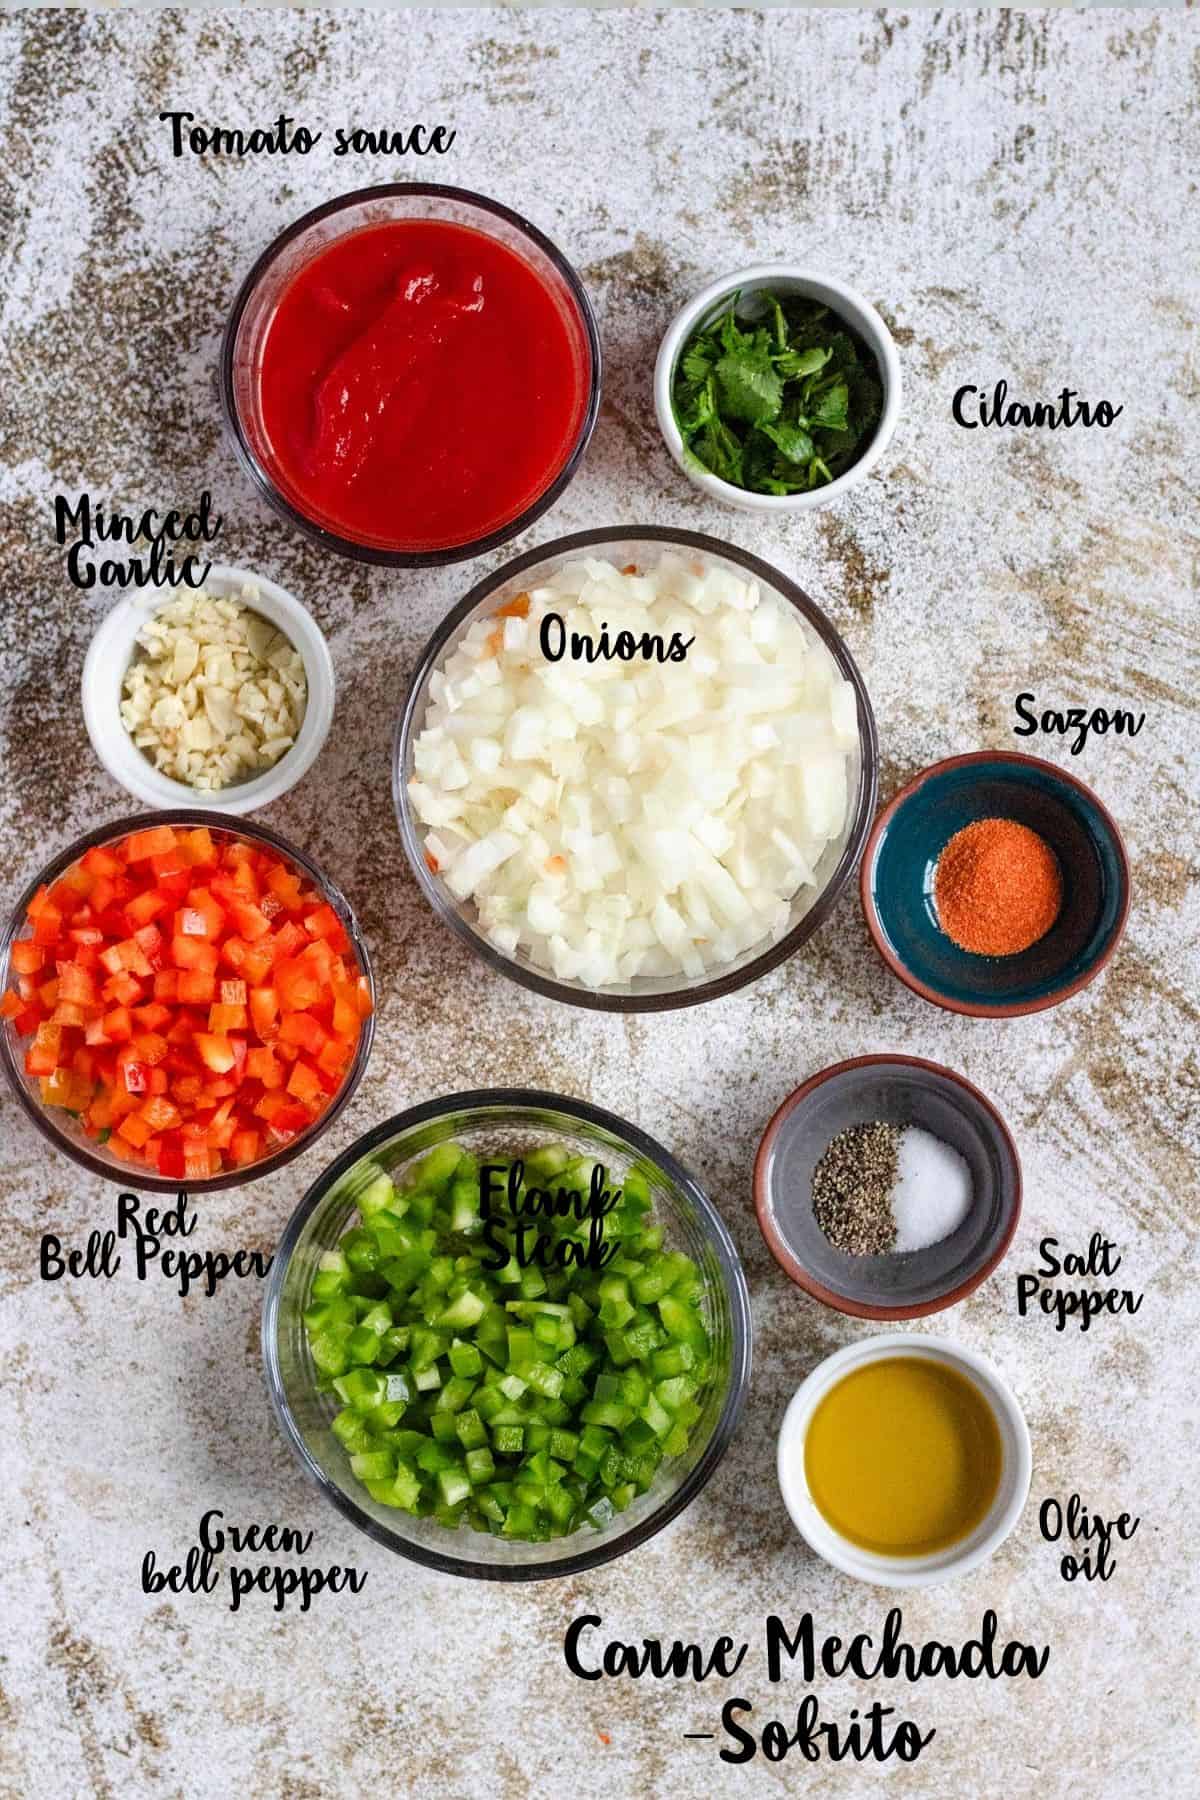 Ingredients shown are used to prepare sofrito. 